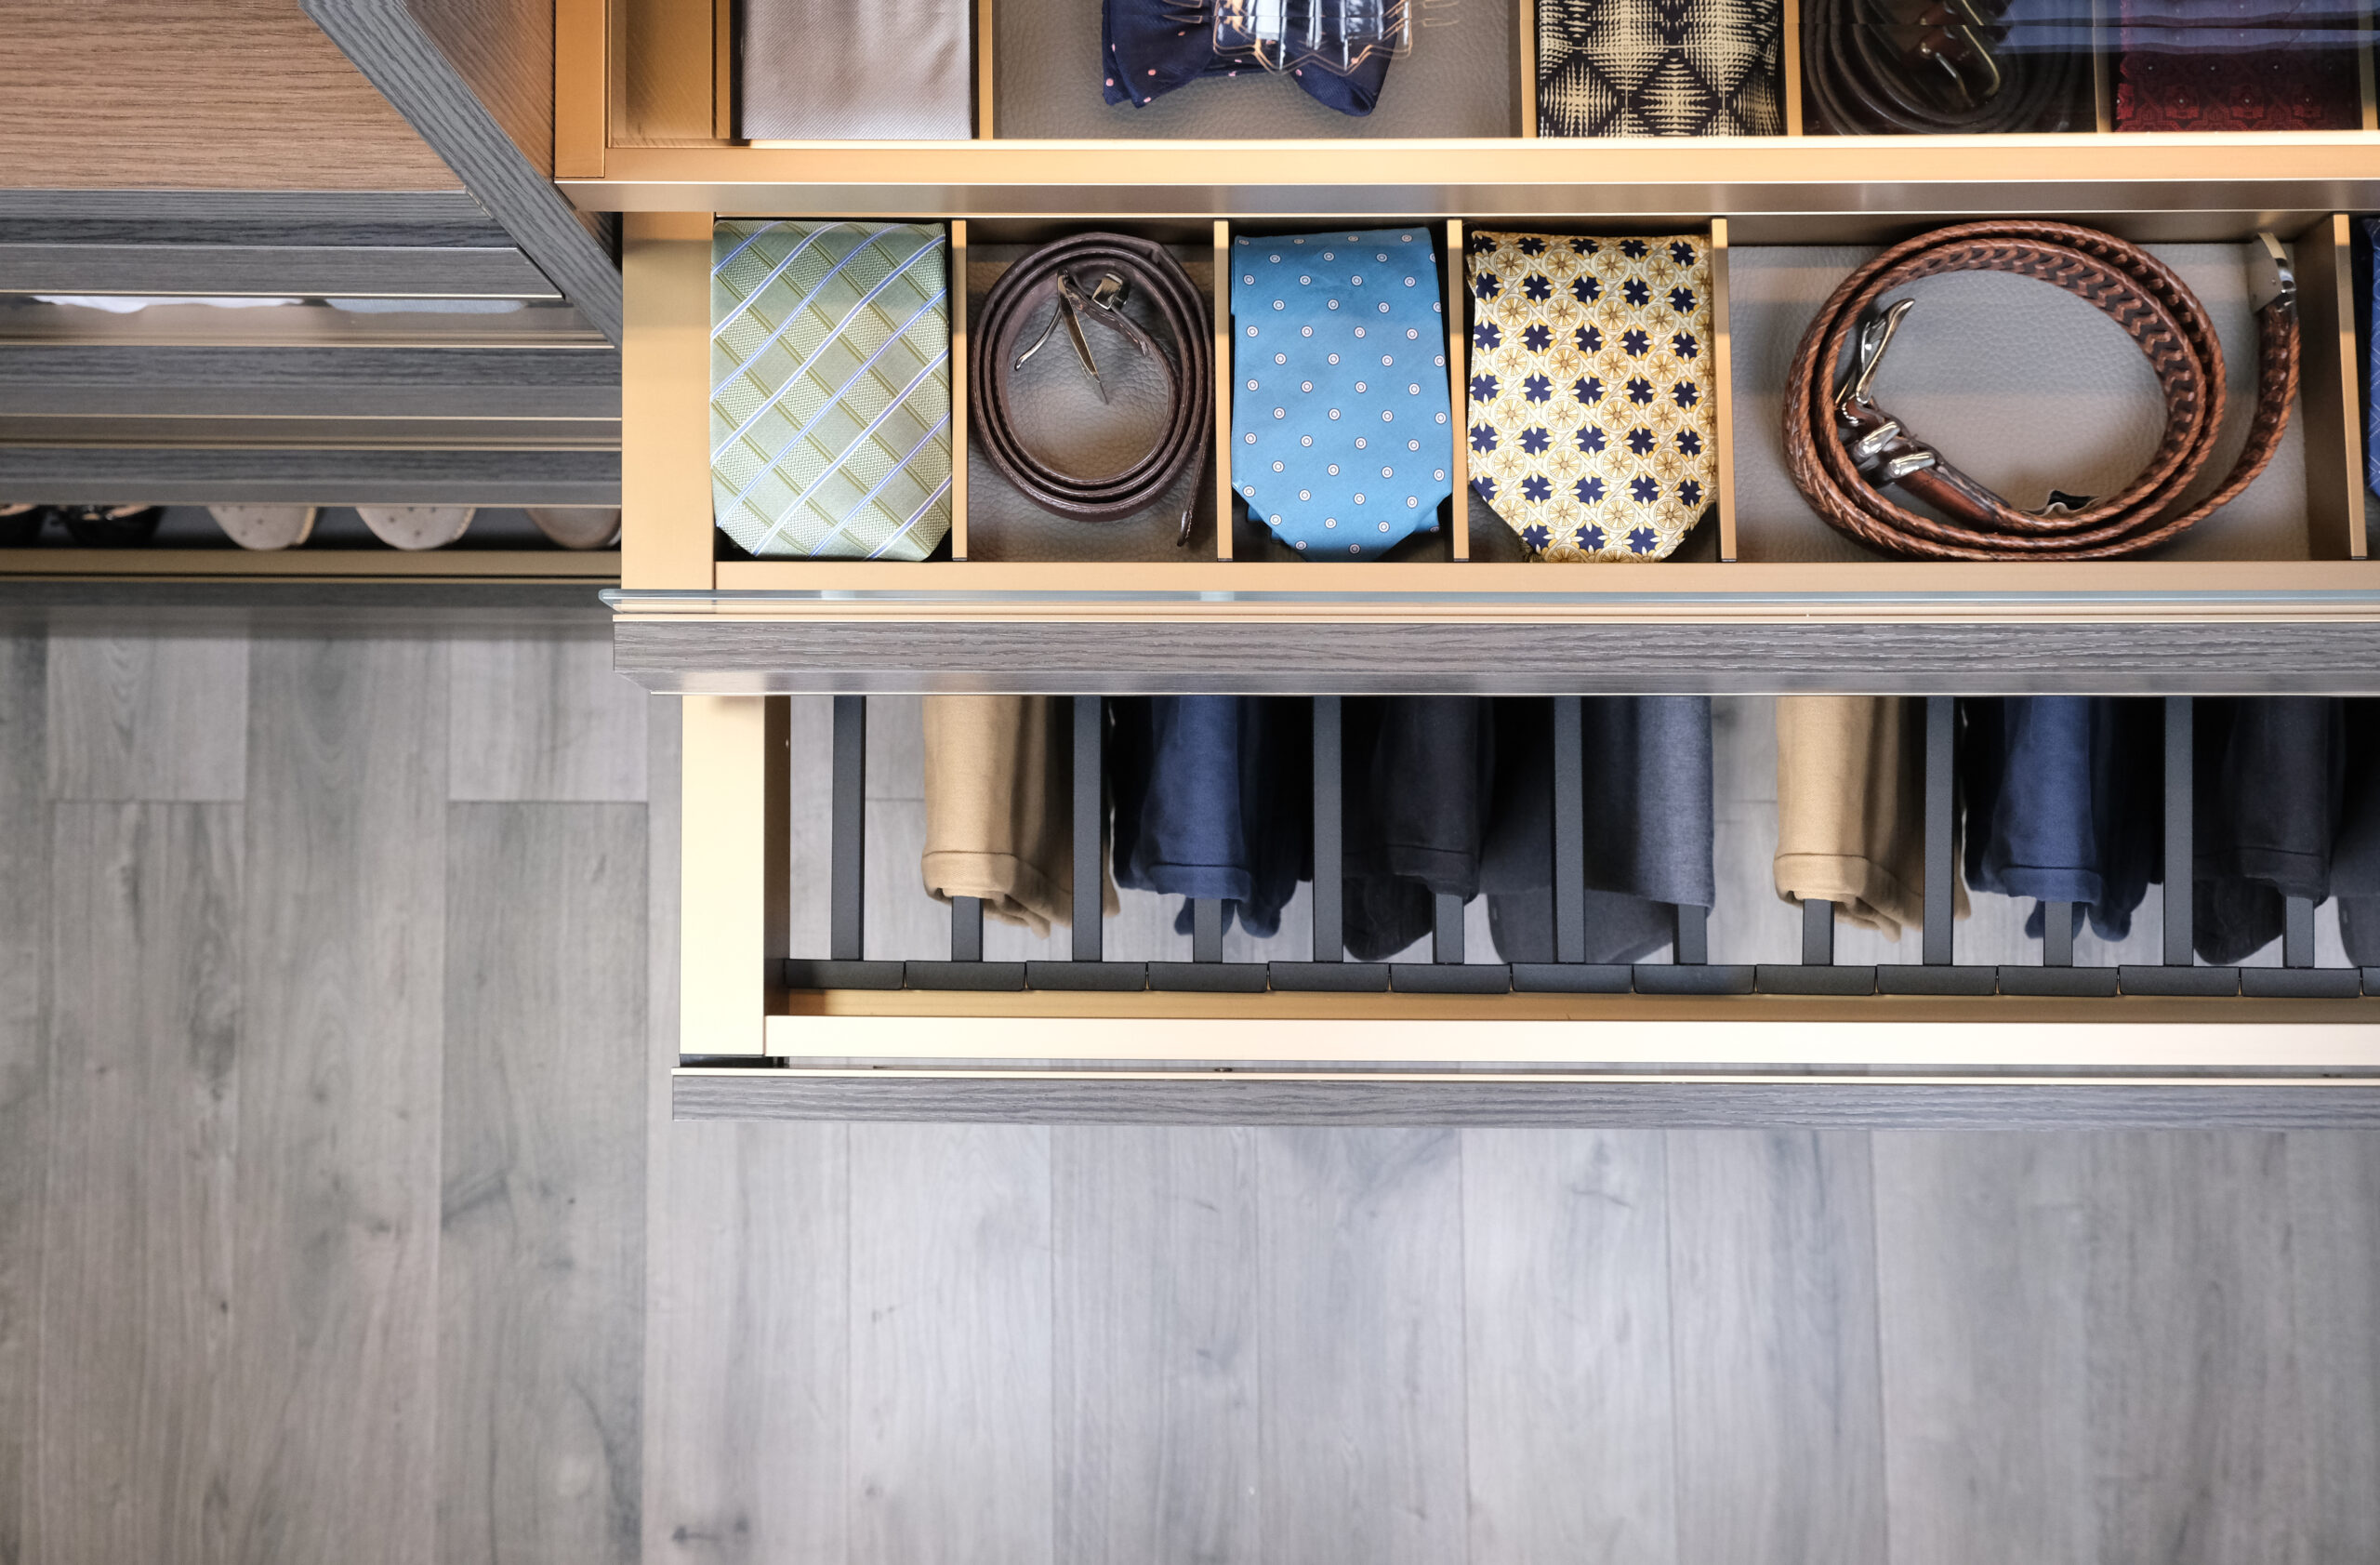 Everstyle Drawers: The Ultimate in Organization